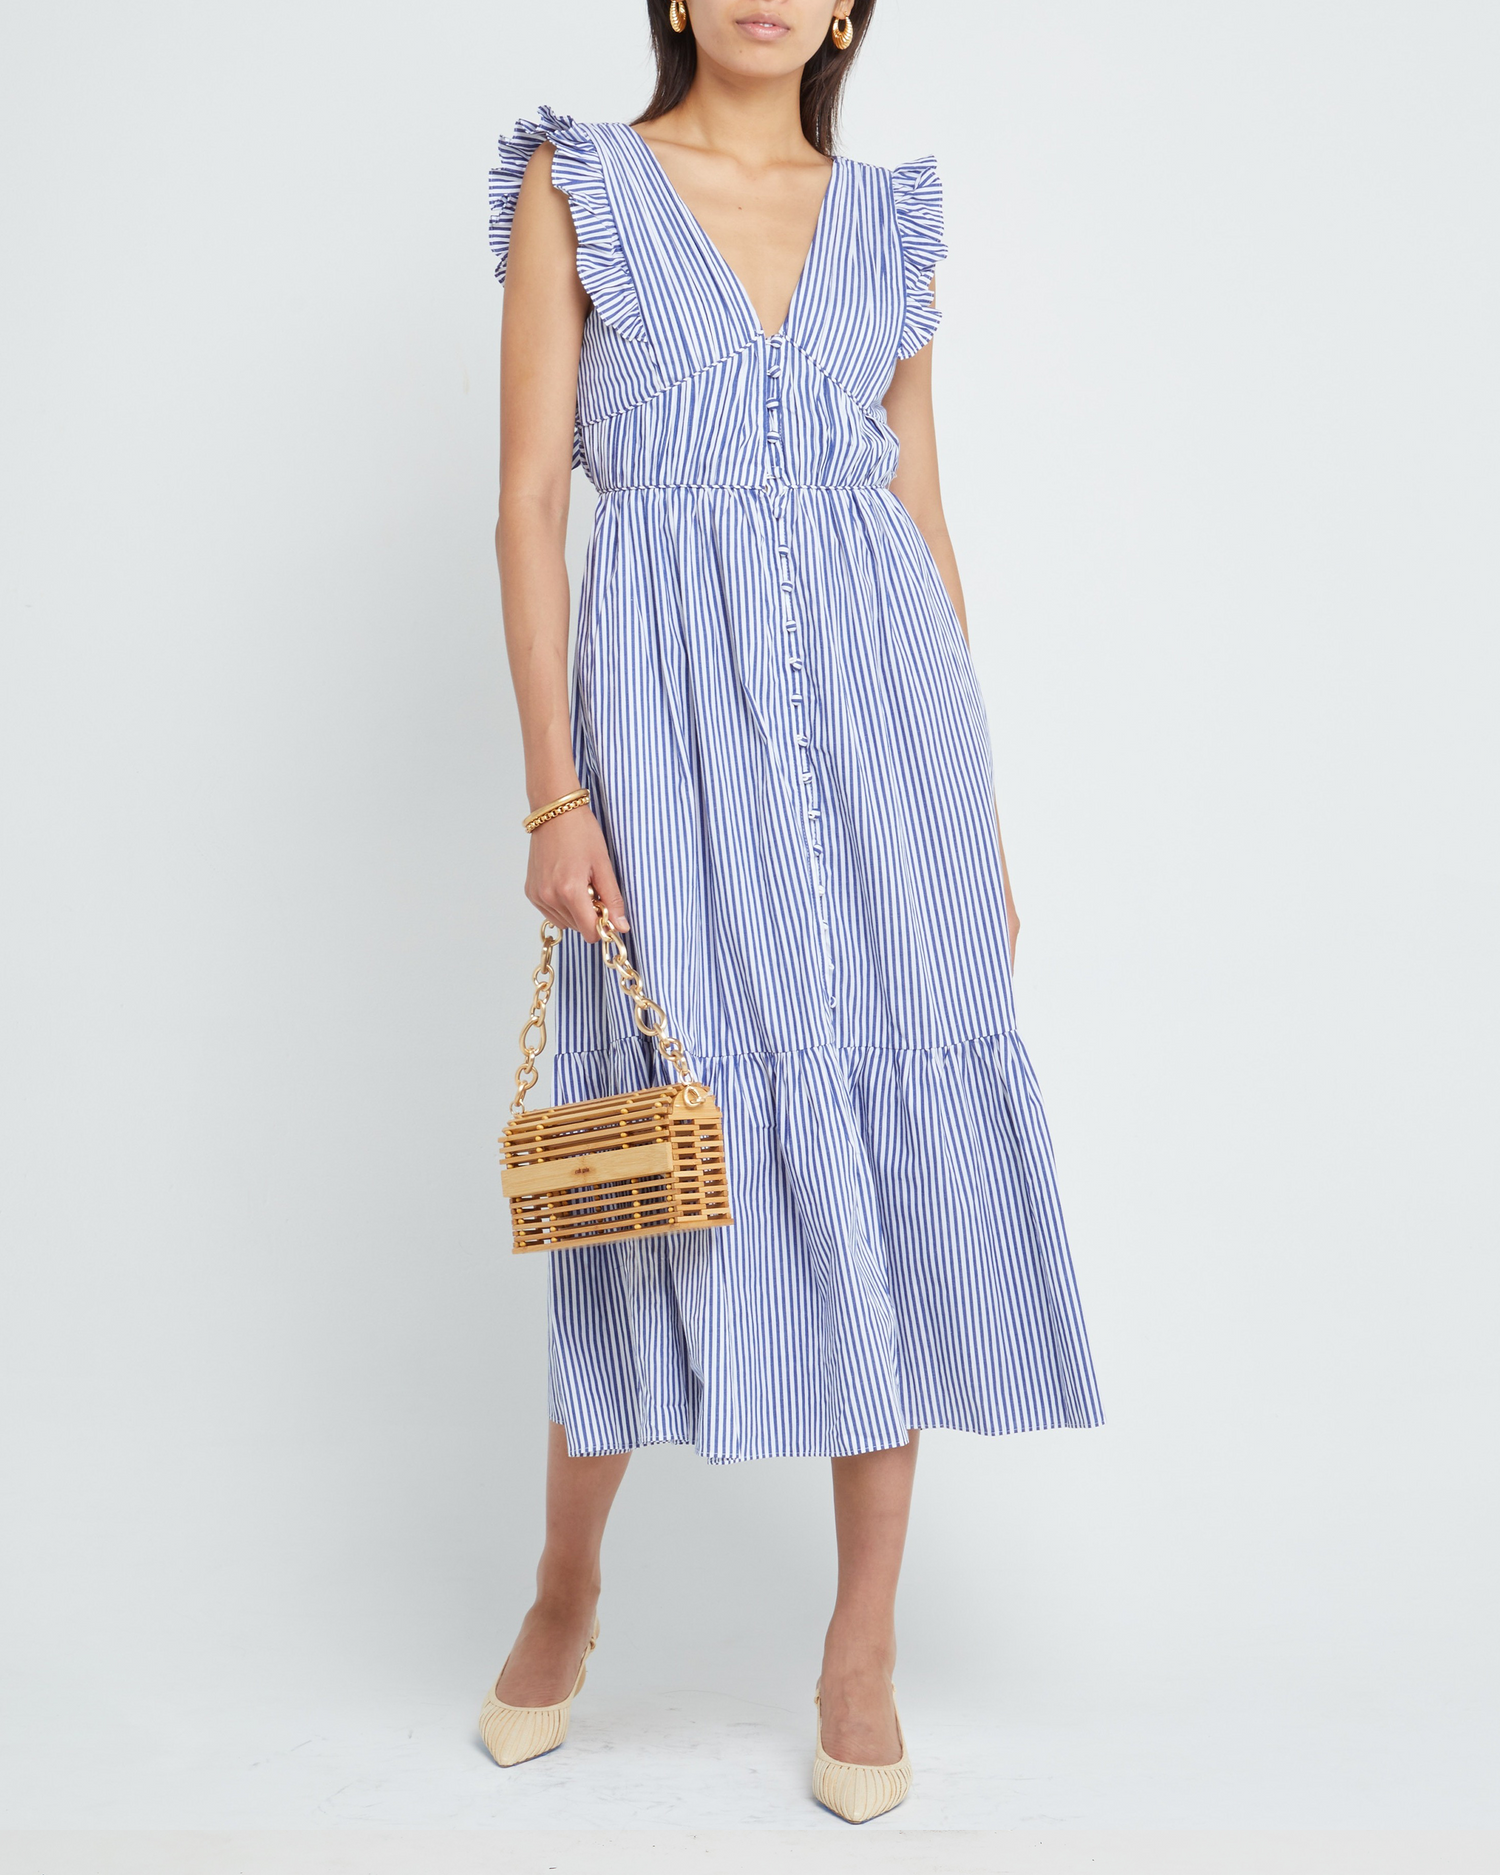 First image of Stella Dress, a blue midi dress, ruffle sleeves, V-neck, lace, tiered